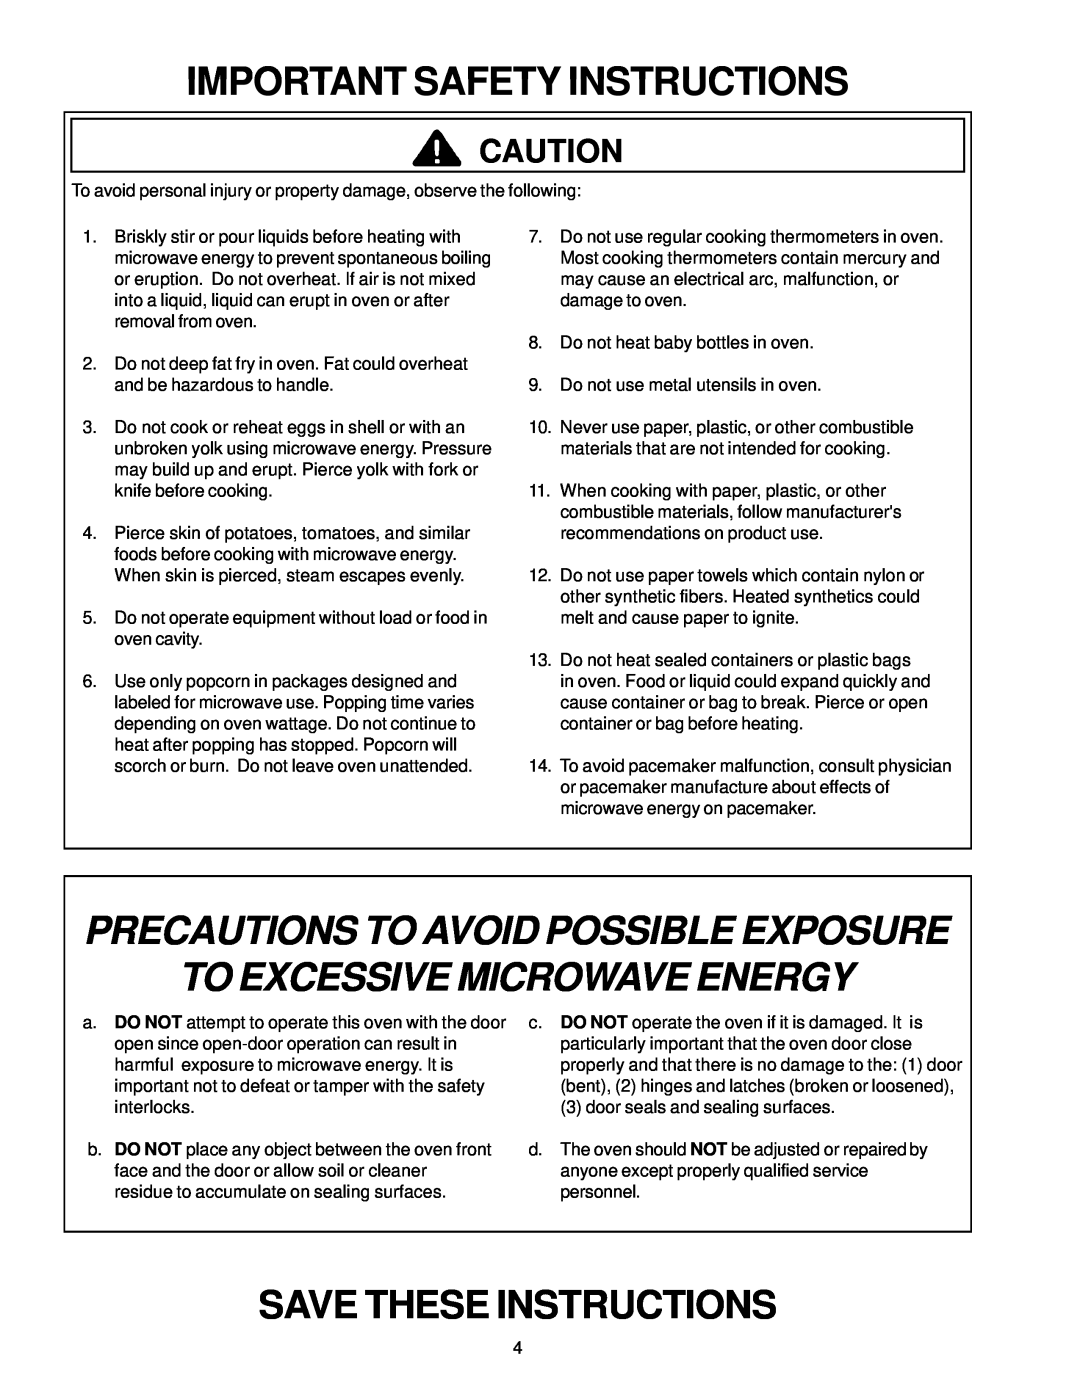 Amana RFS9, RFS11 Important Safety Instructions, Precautions To Avoid Possible Exposure To Excessive Microwave Energy 